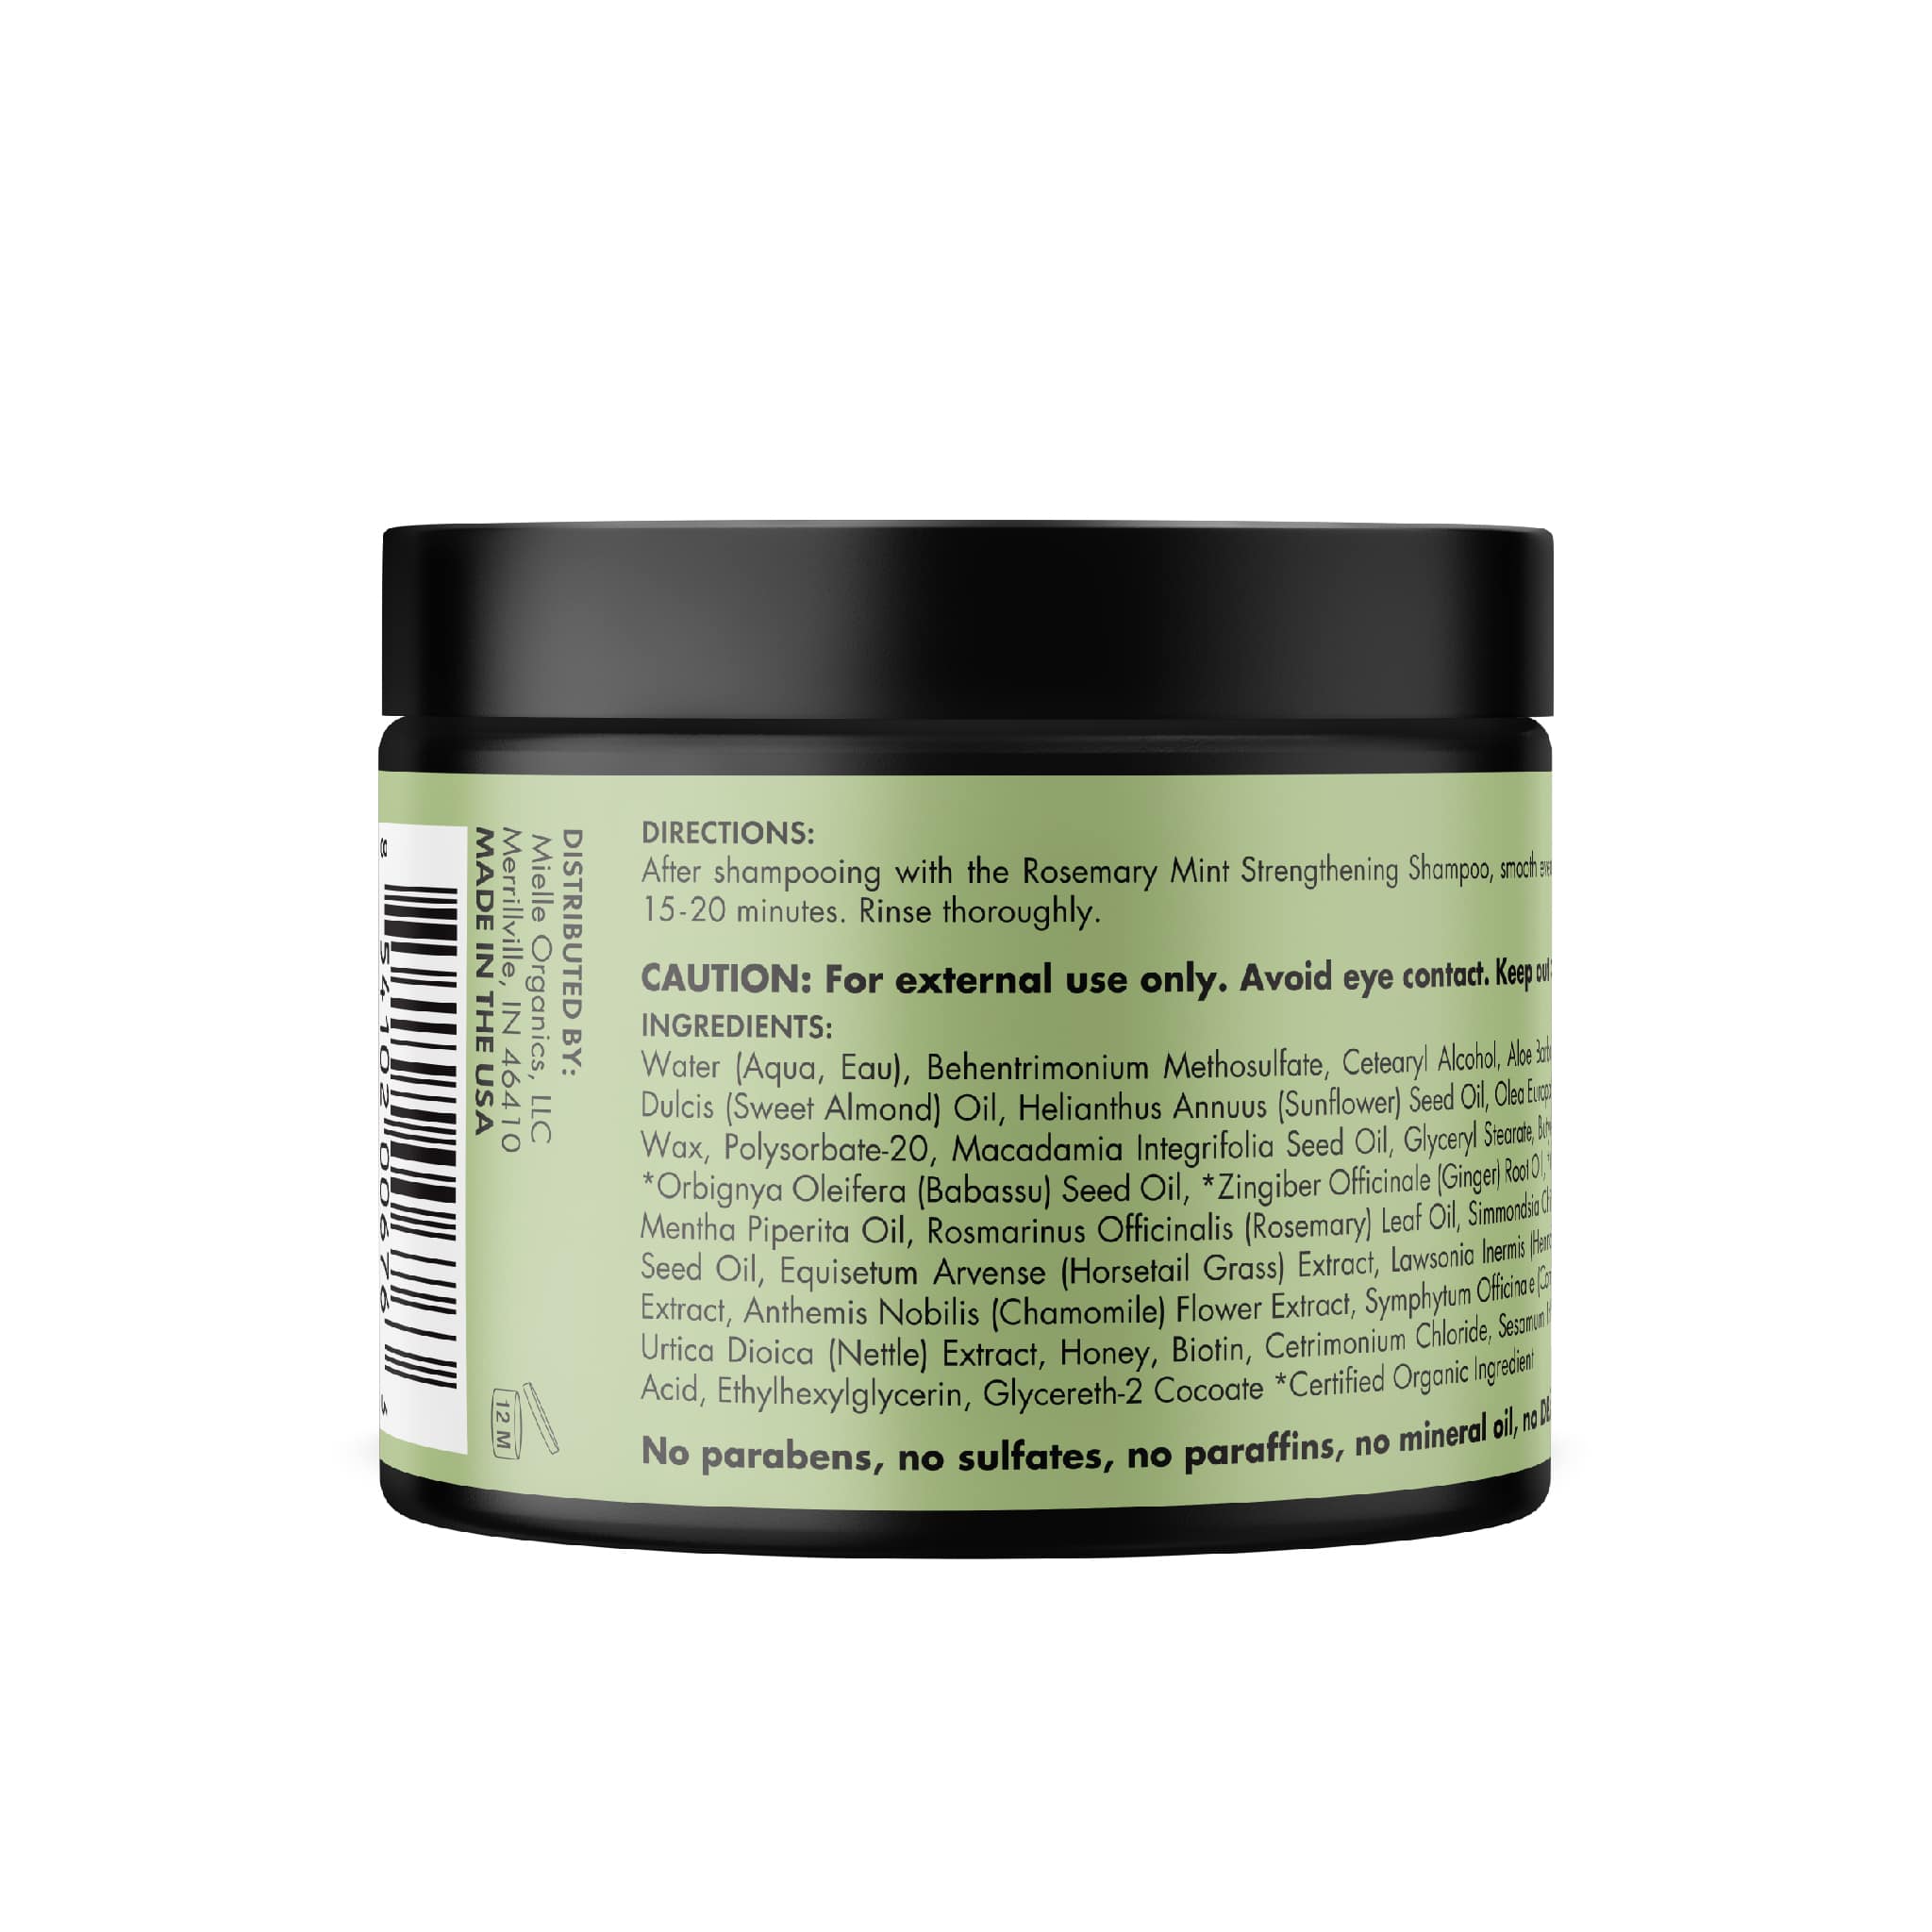 MIELLE - Rosemary Mint Strengthening Hair Masque